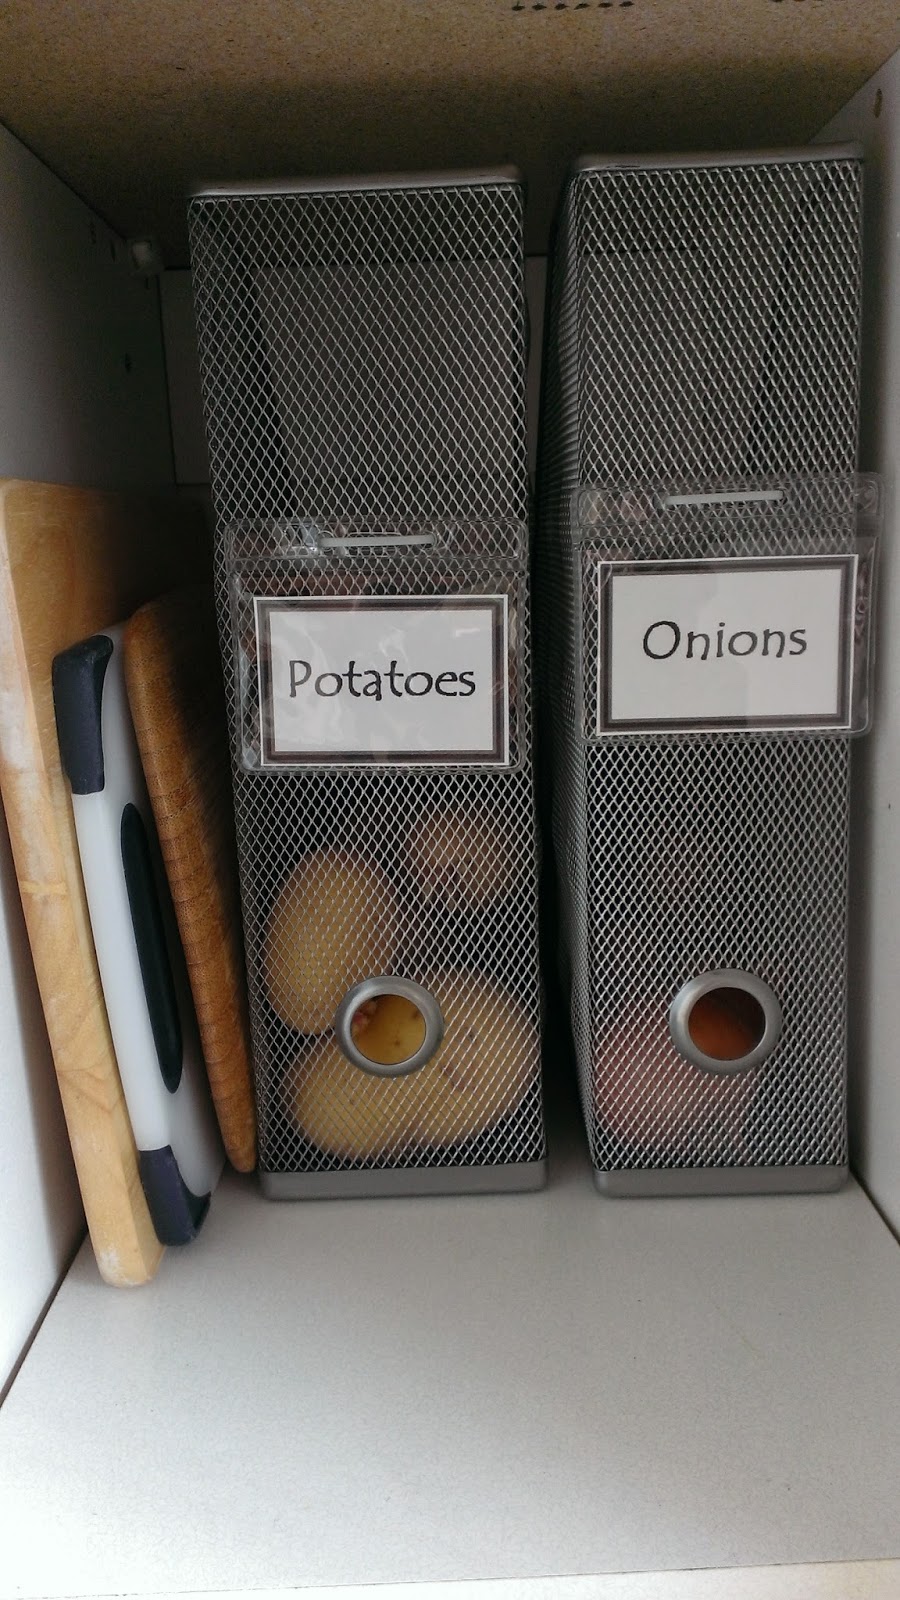 Mesh magazine holders are good for storing onions and potatoes